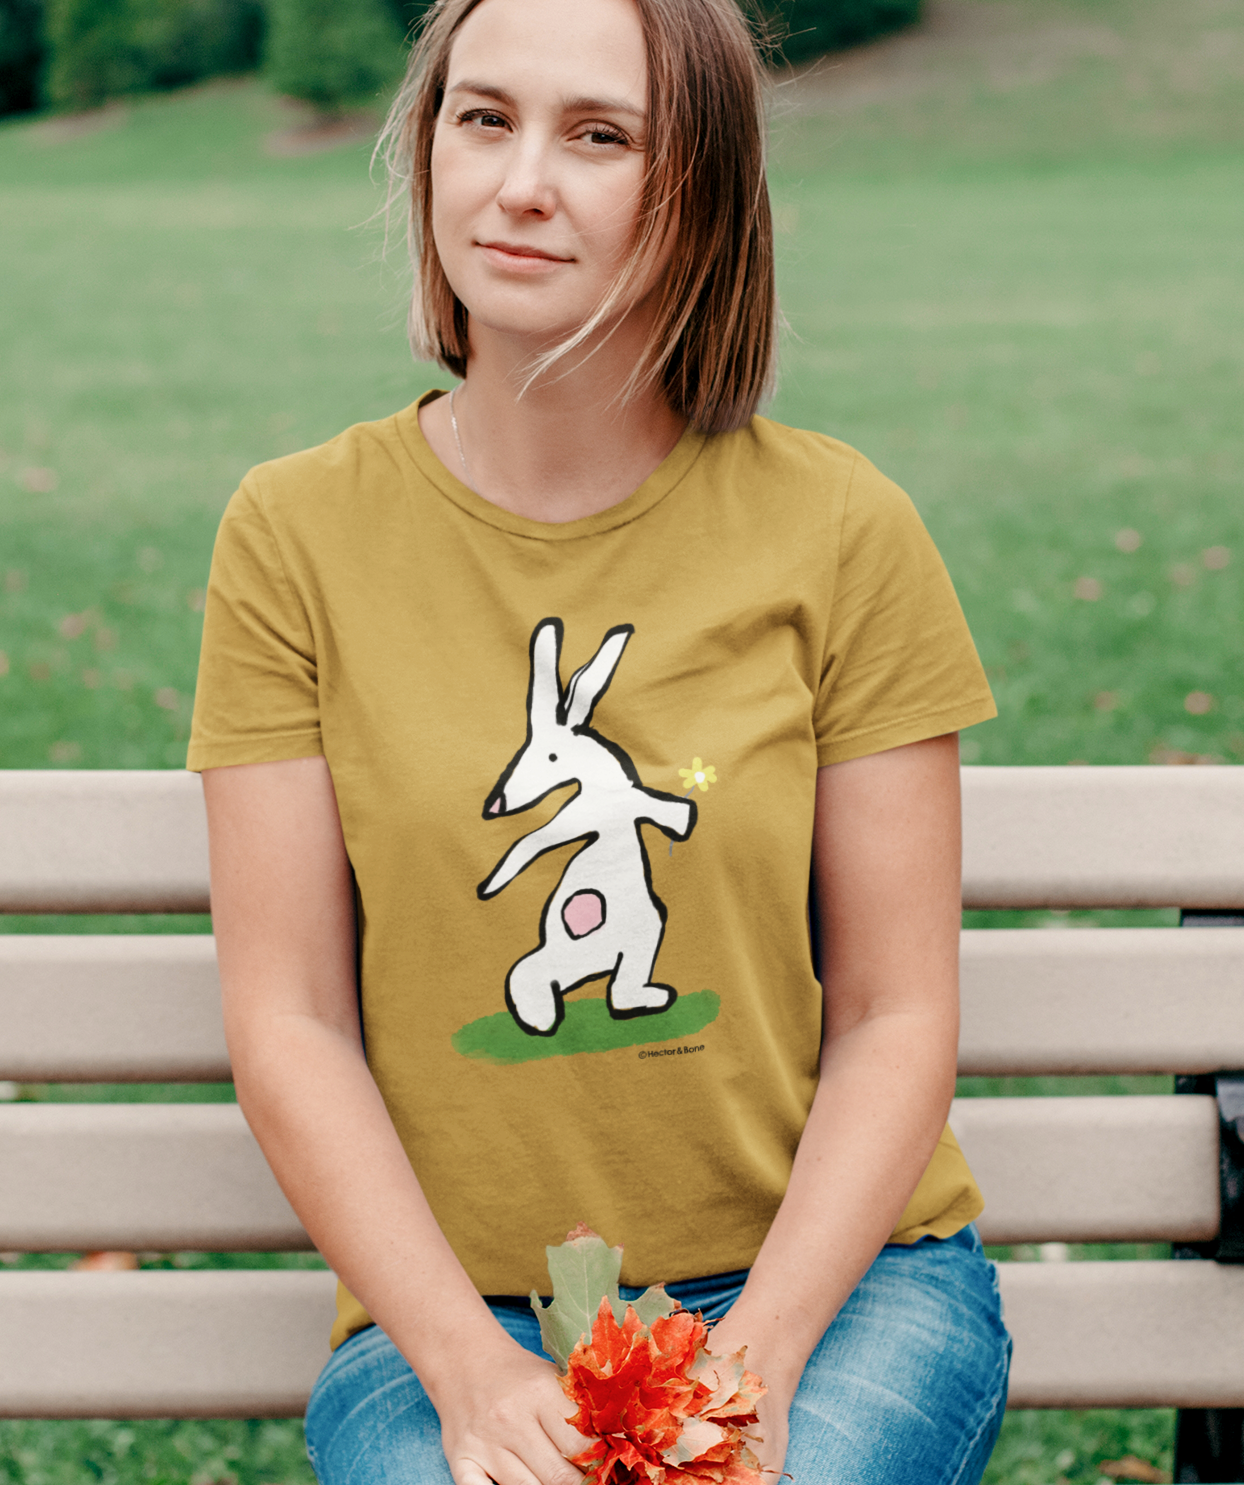 Bunny T-shirt - Young woman wearing Illustrated bunny rabbit holding a flower design on a ochre colour vegan cotton t-shirt - Easter Bunny t-shirts by Hector and Bone